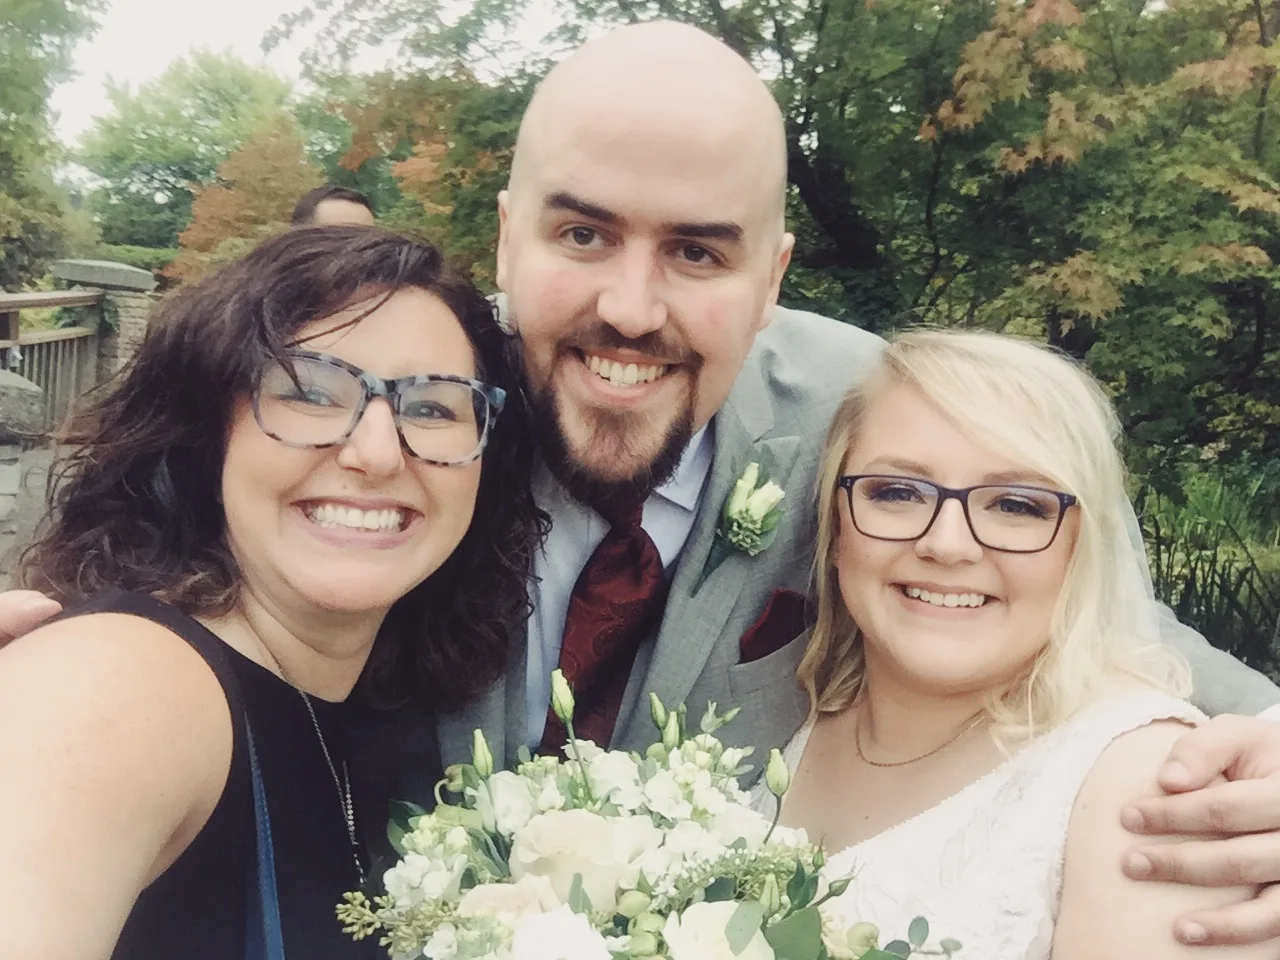 Officiant Lani snaps a selfie with the newlyweds Colleen and Dominic